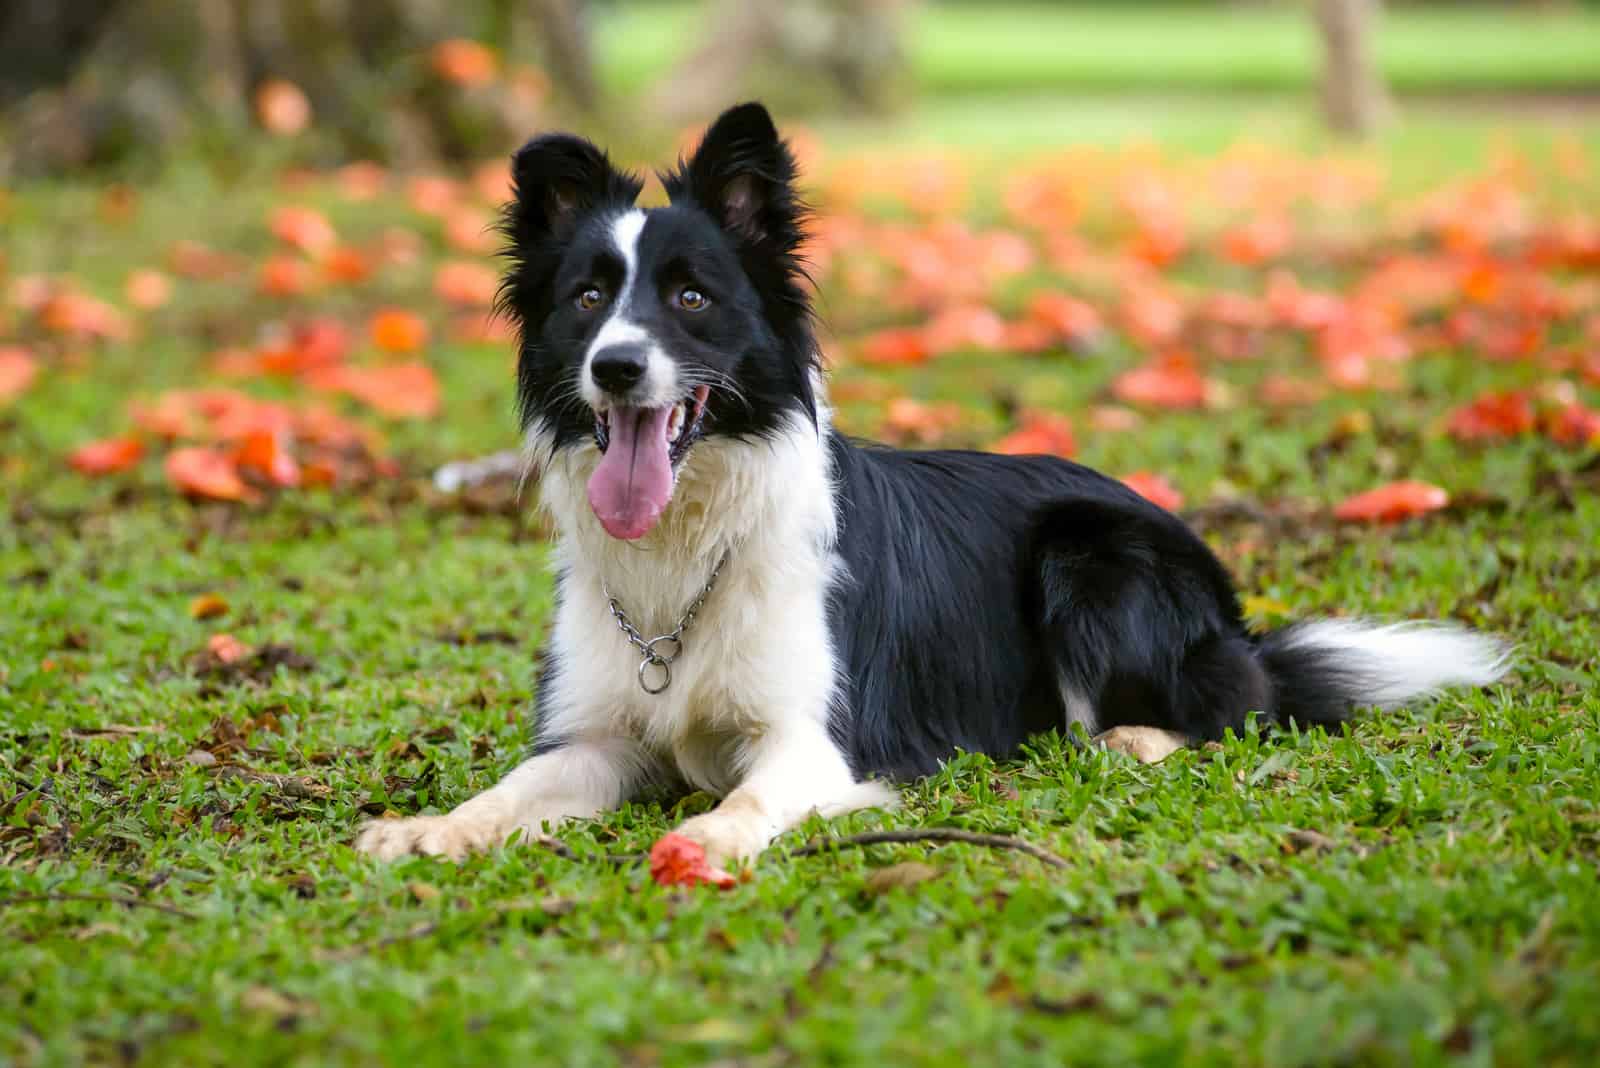 order collie dog lying down on the grass